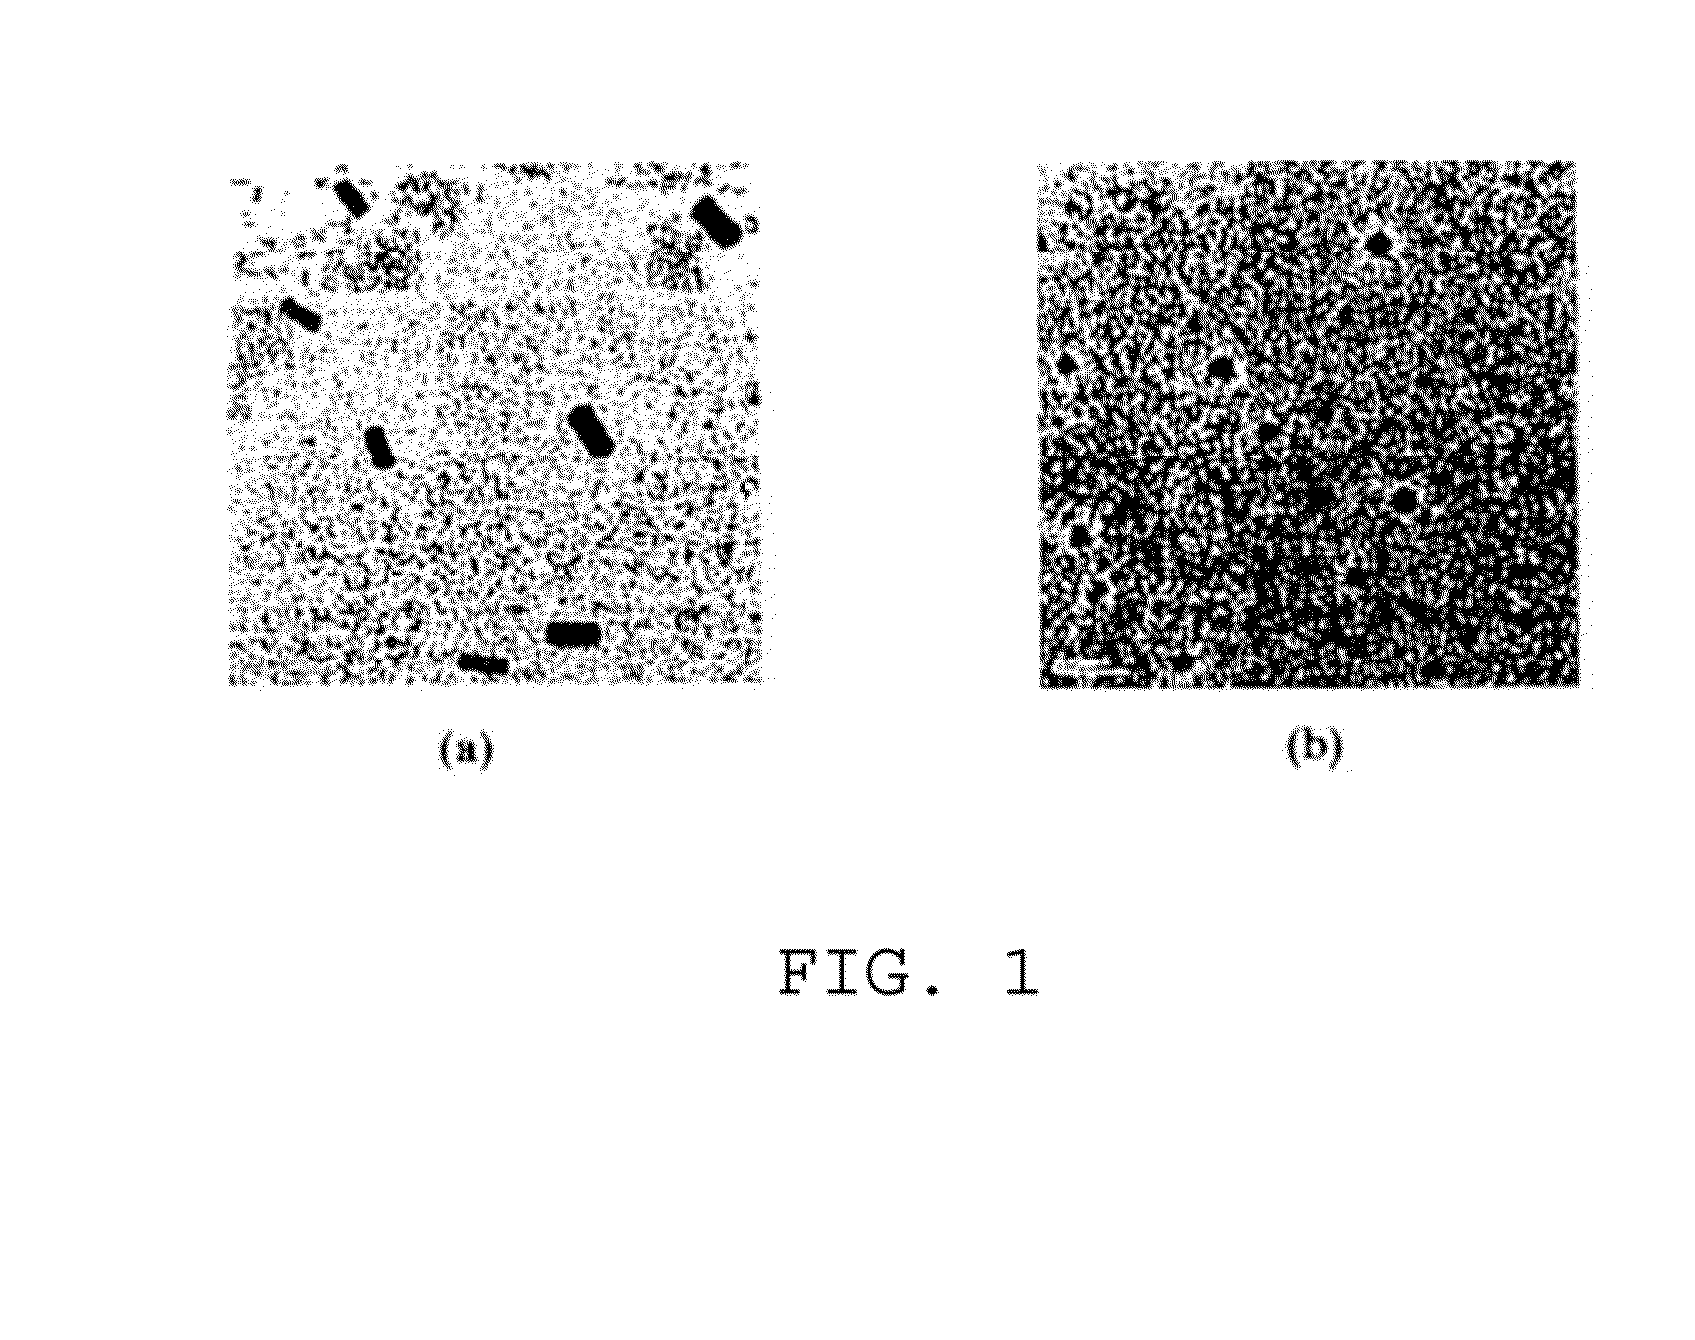 Aqueous Method of Making Magnetic Iron Oxide Nanoparticles